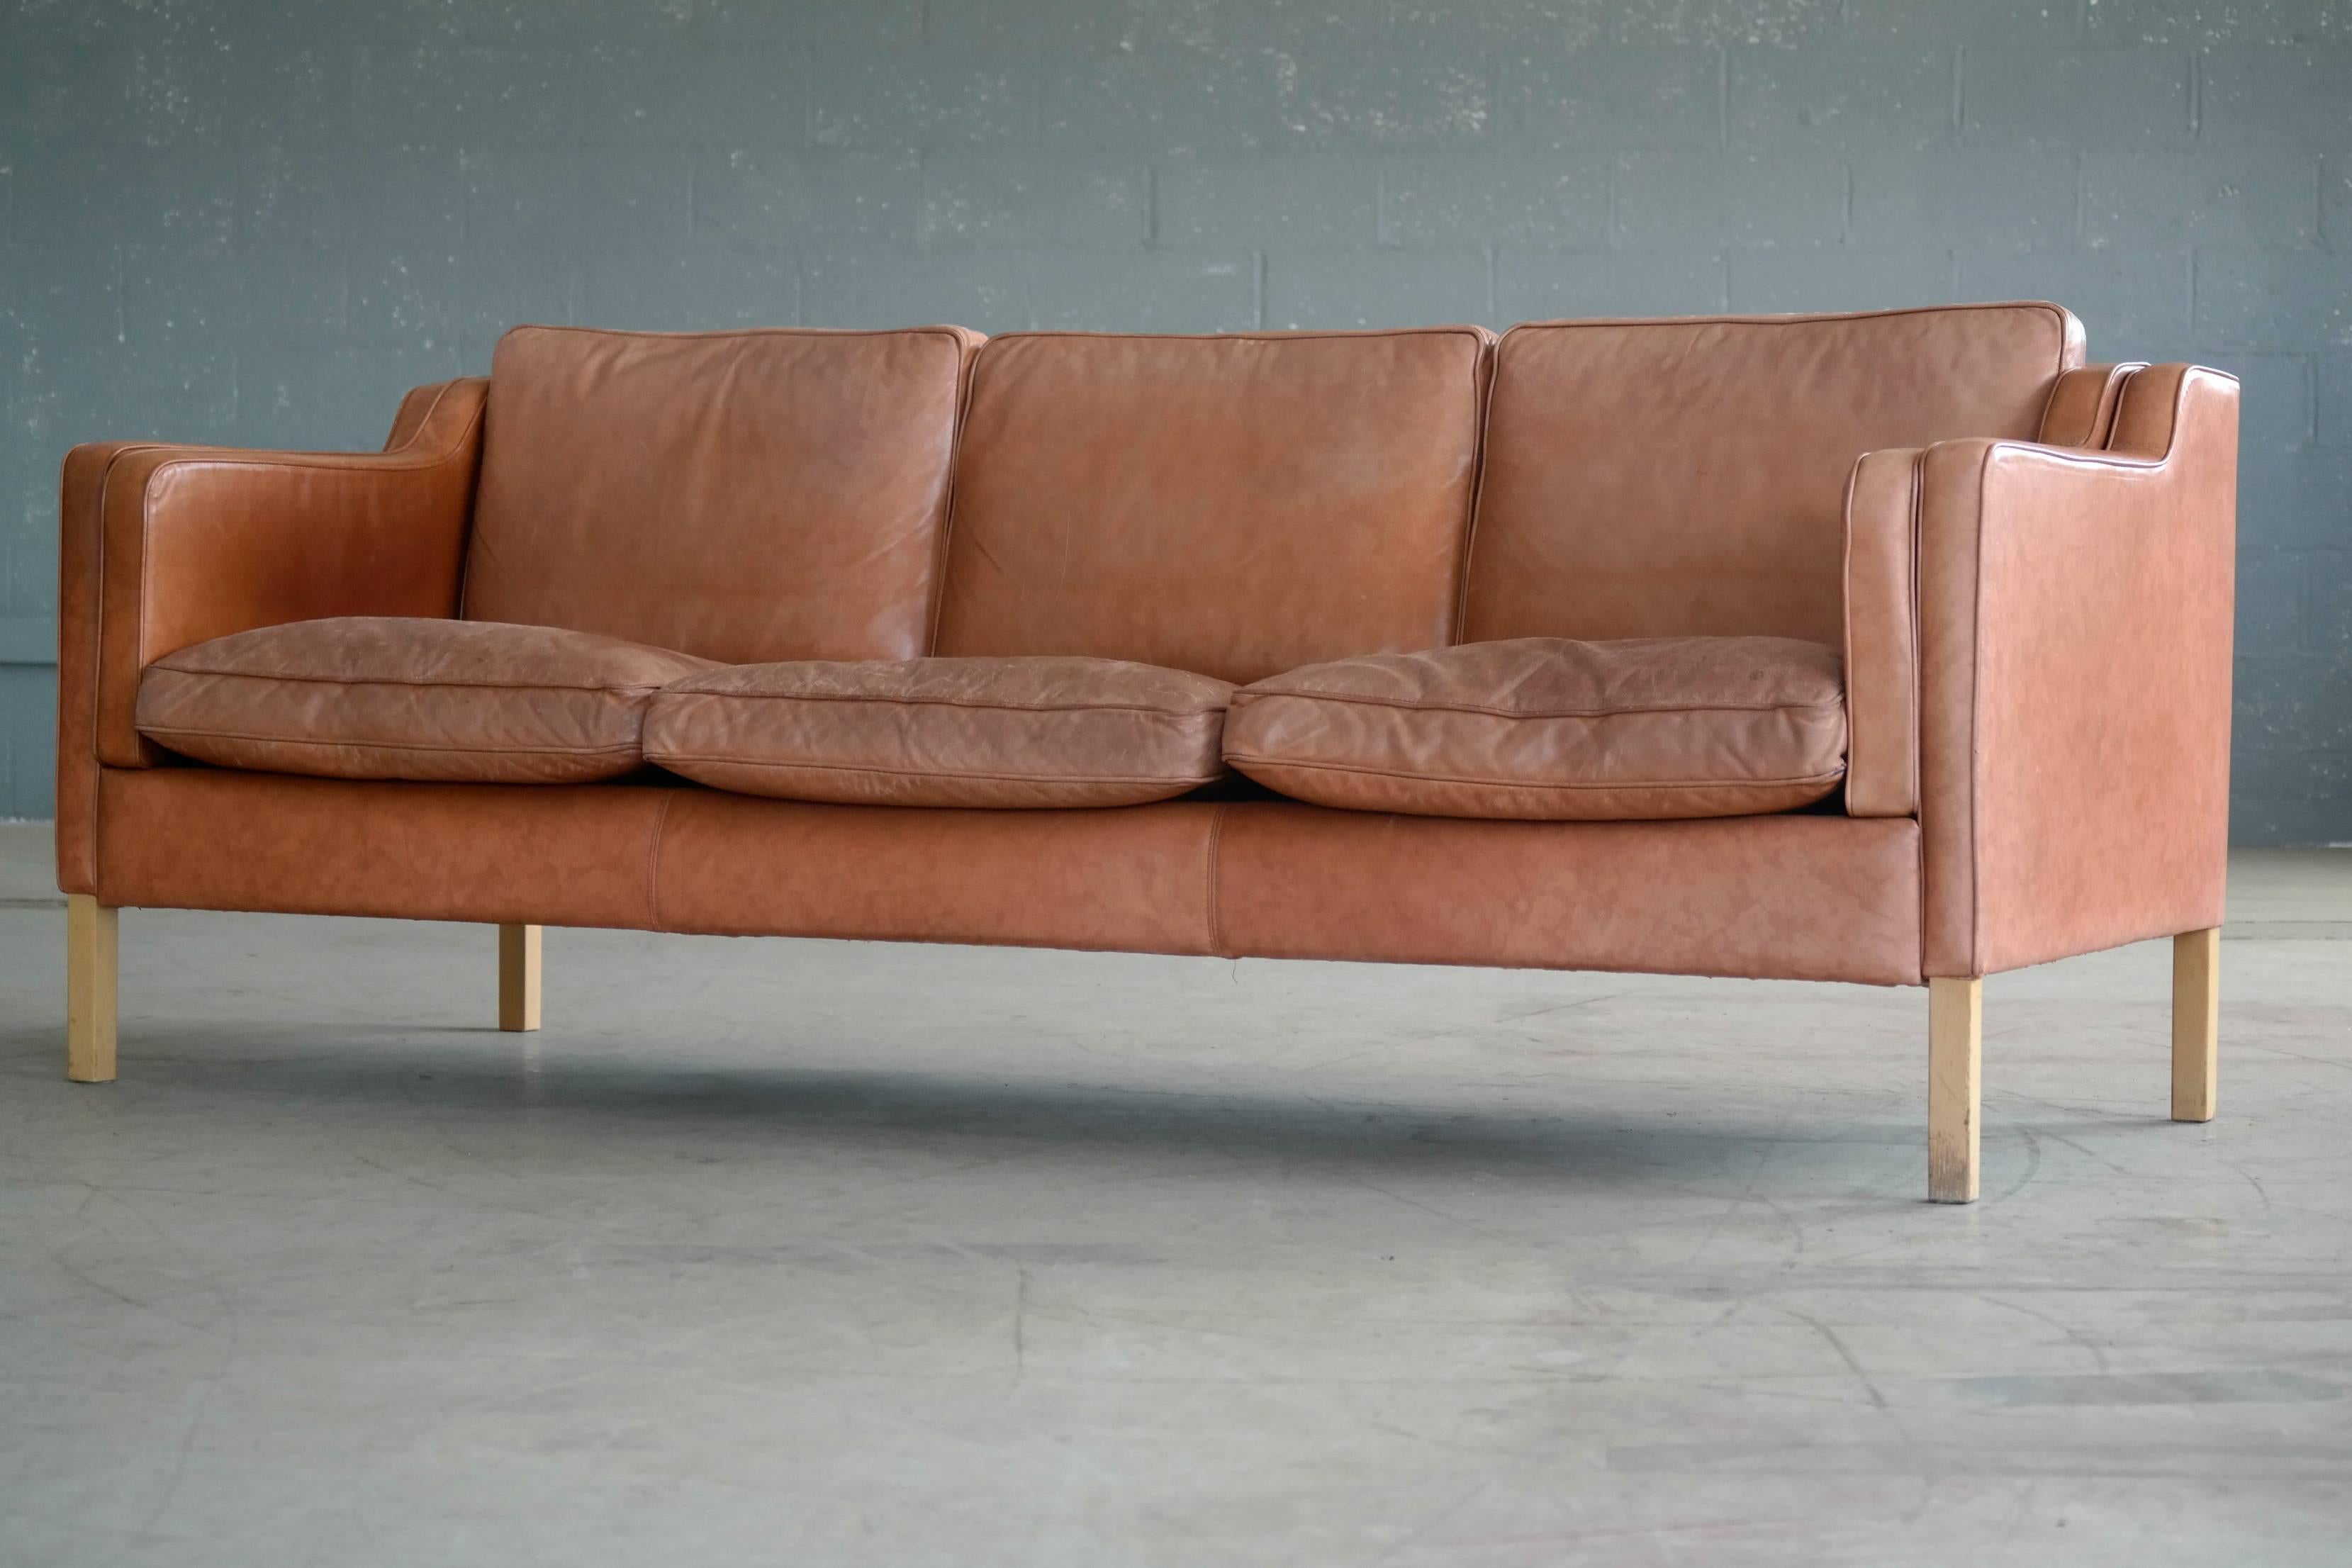 Mid-Century Modern Børge Mogensen Style Sofa Model 2213 in Light Cognac Leather by Stouby Mobler